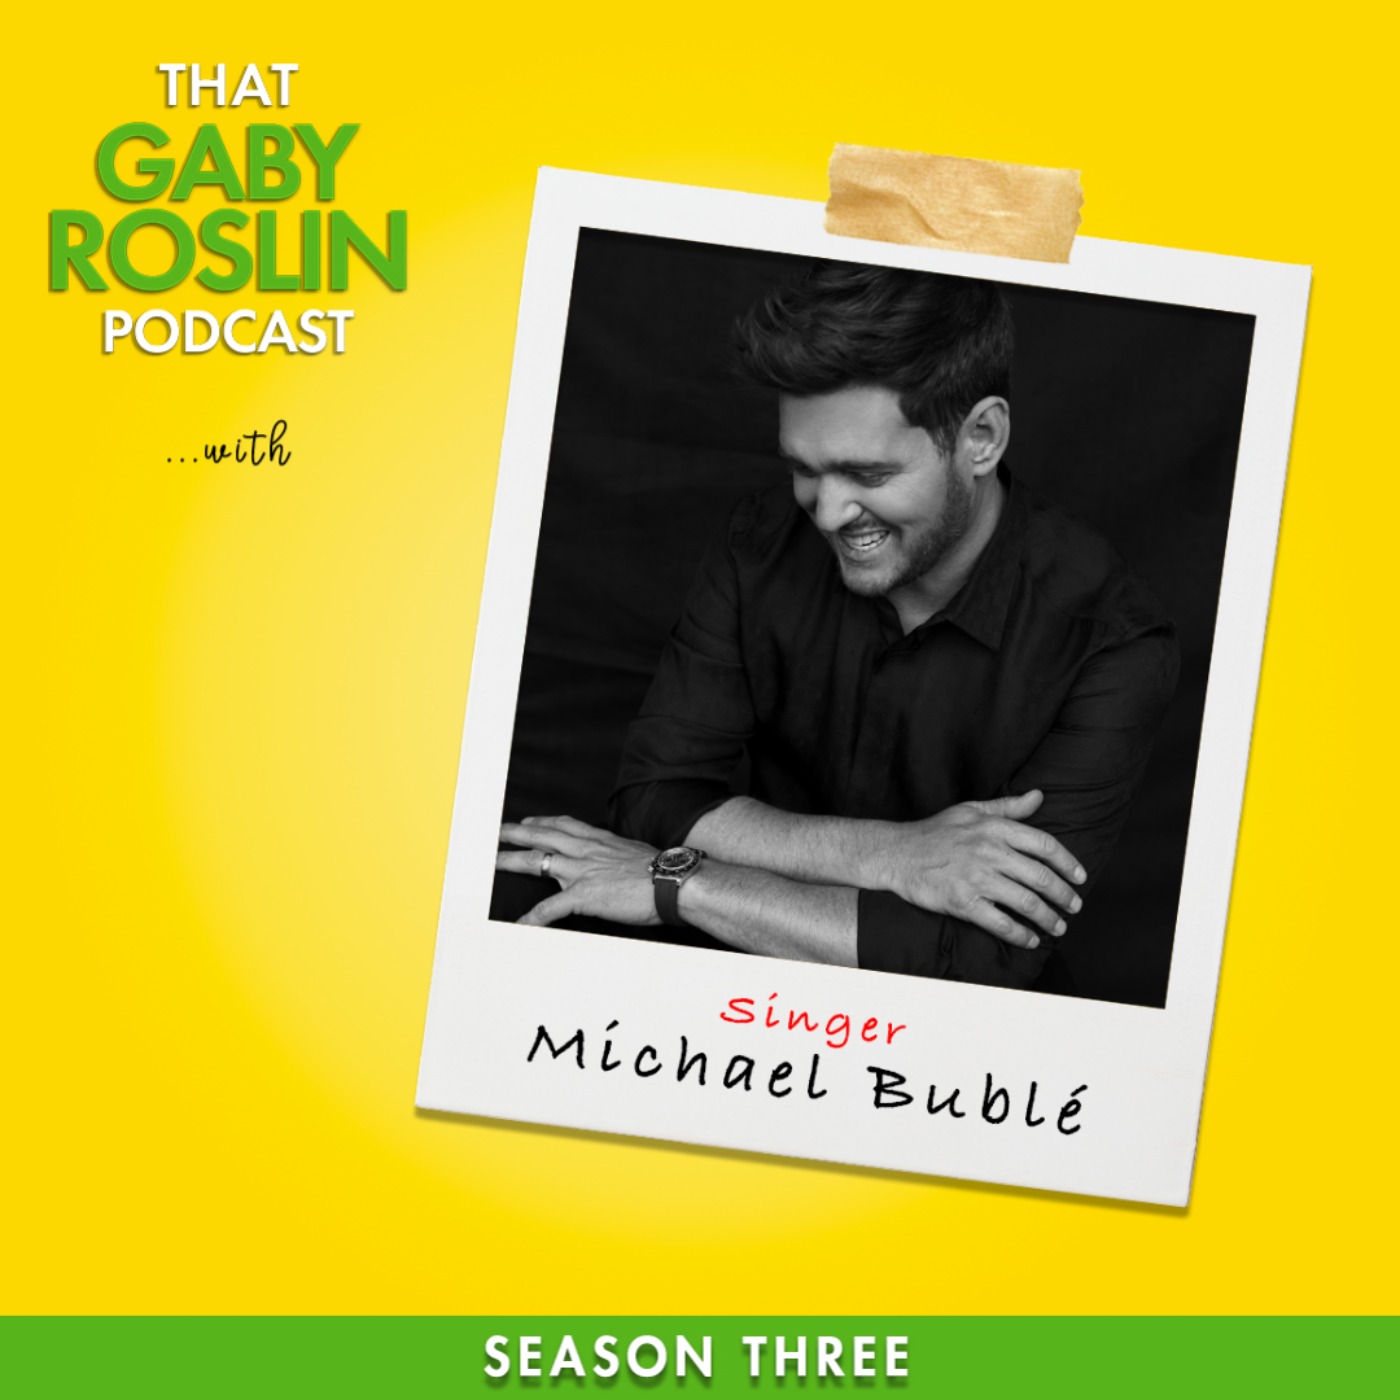 cover art for Michael Bublé